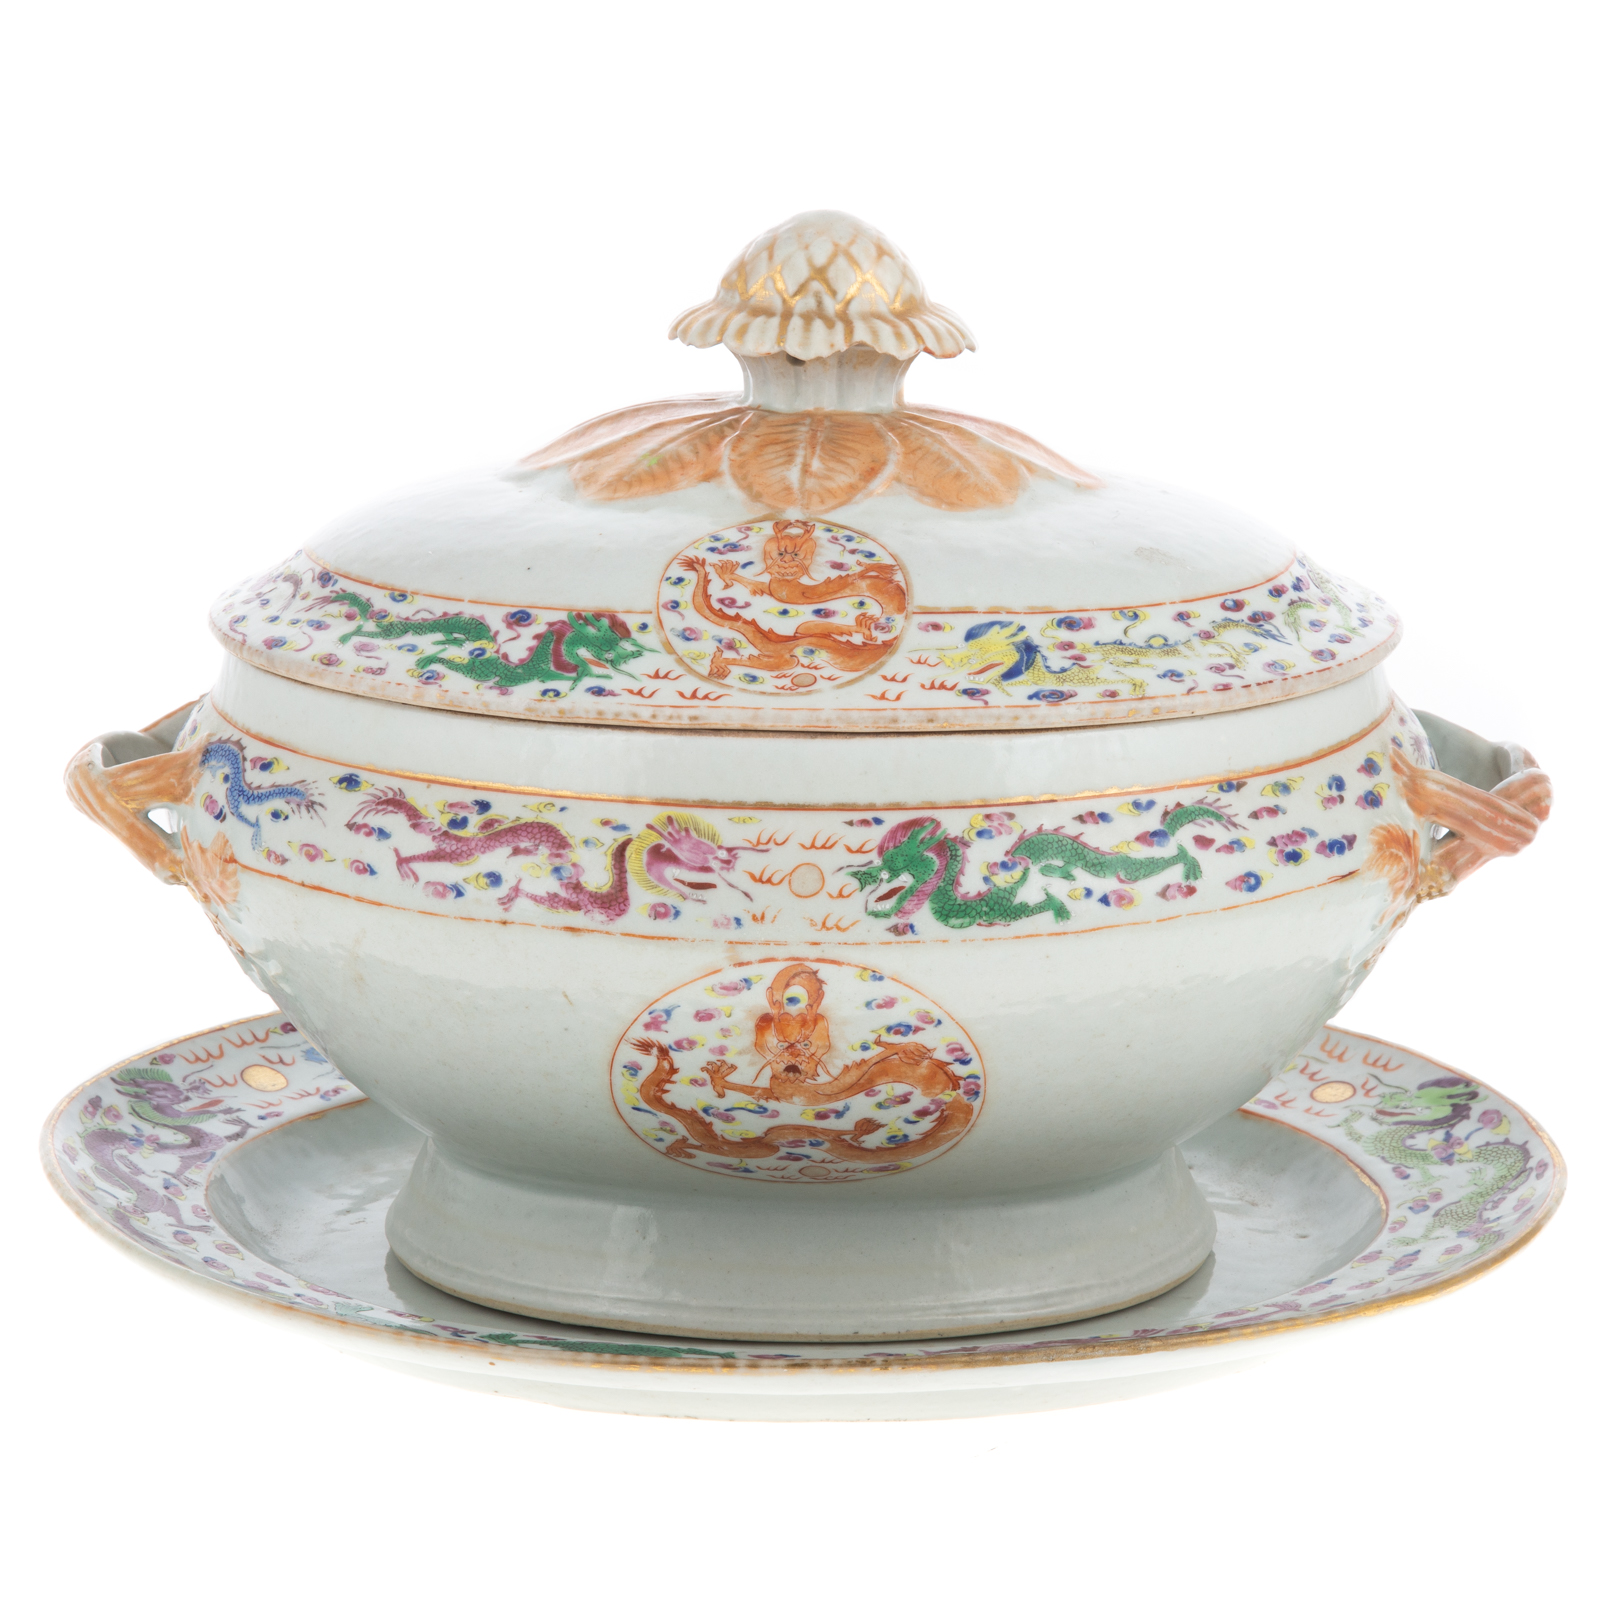 CHINESE EXPORT SOUP TUREEN STAND 3caf14